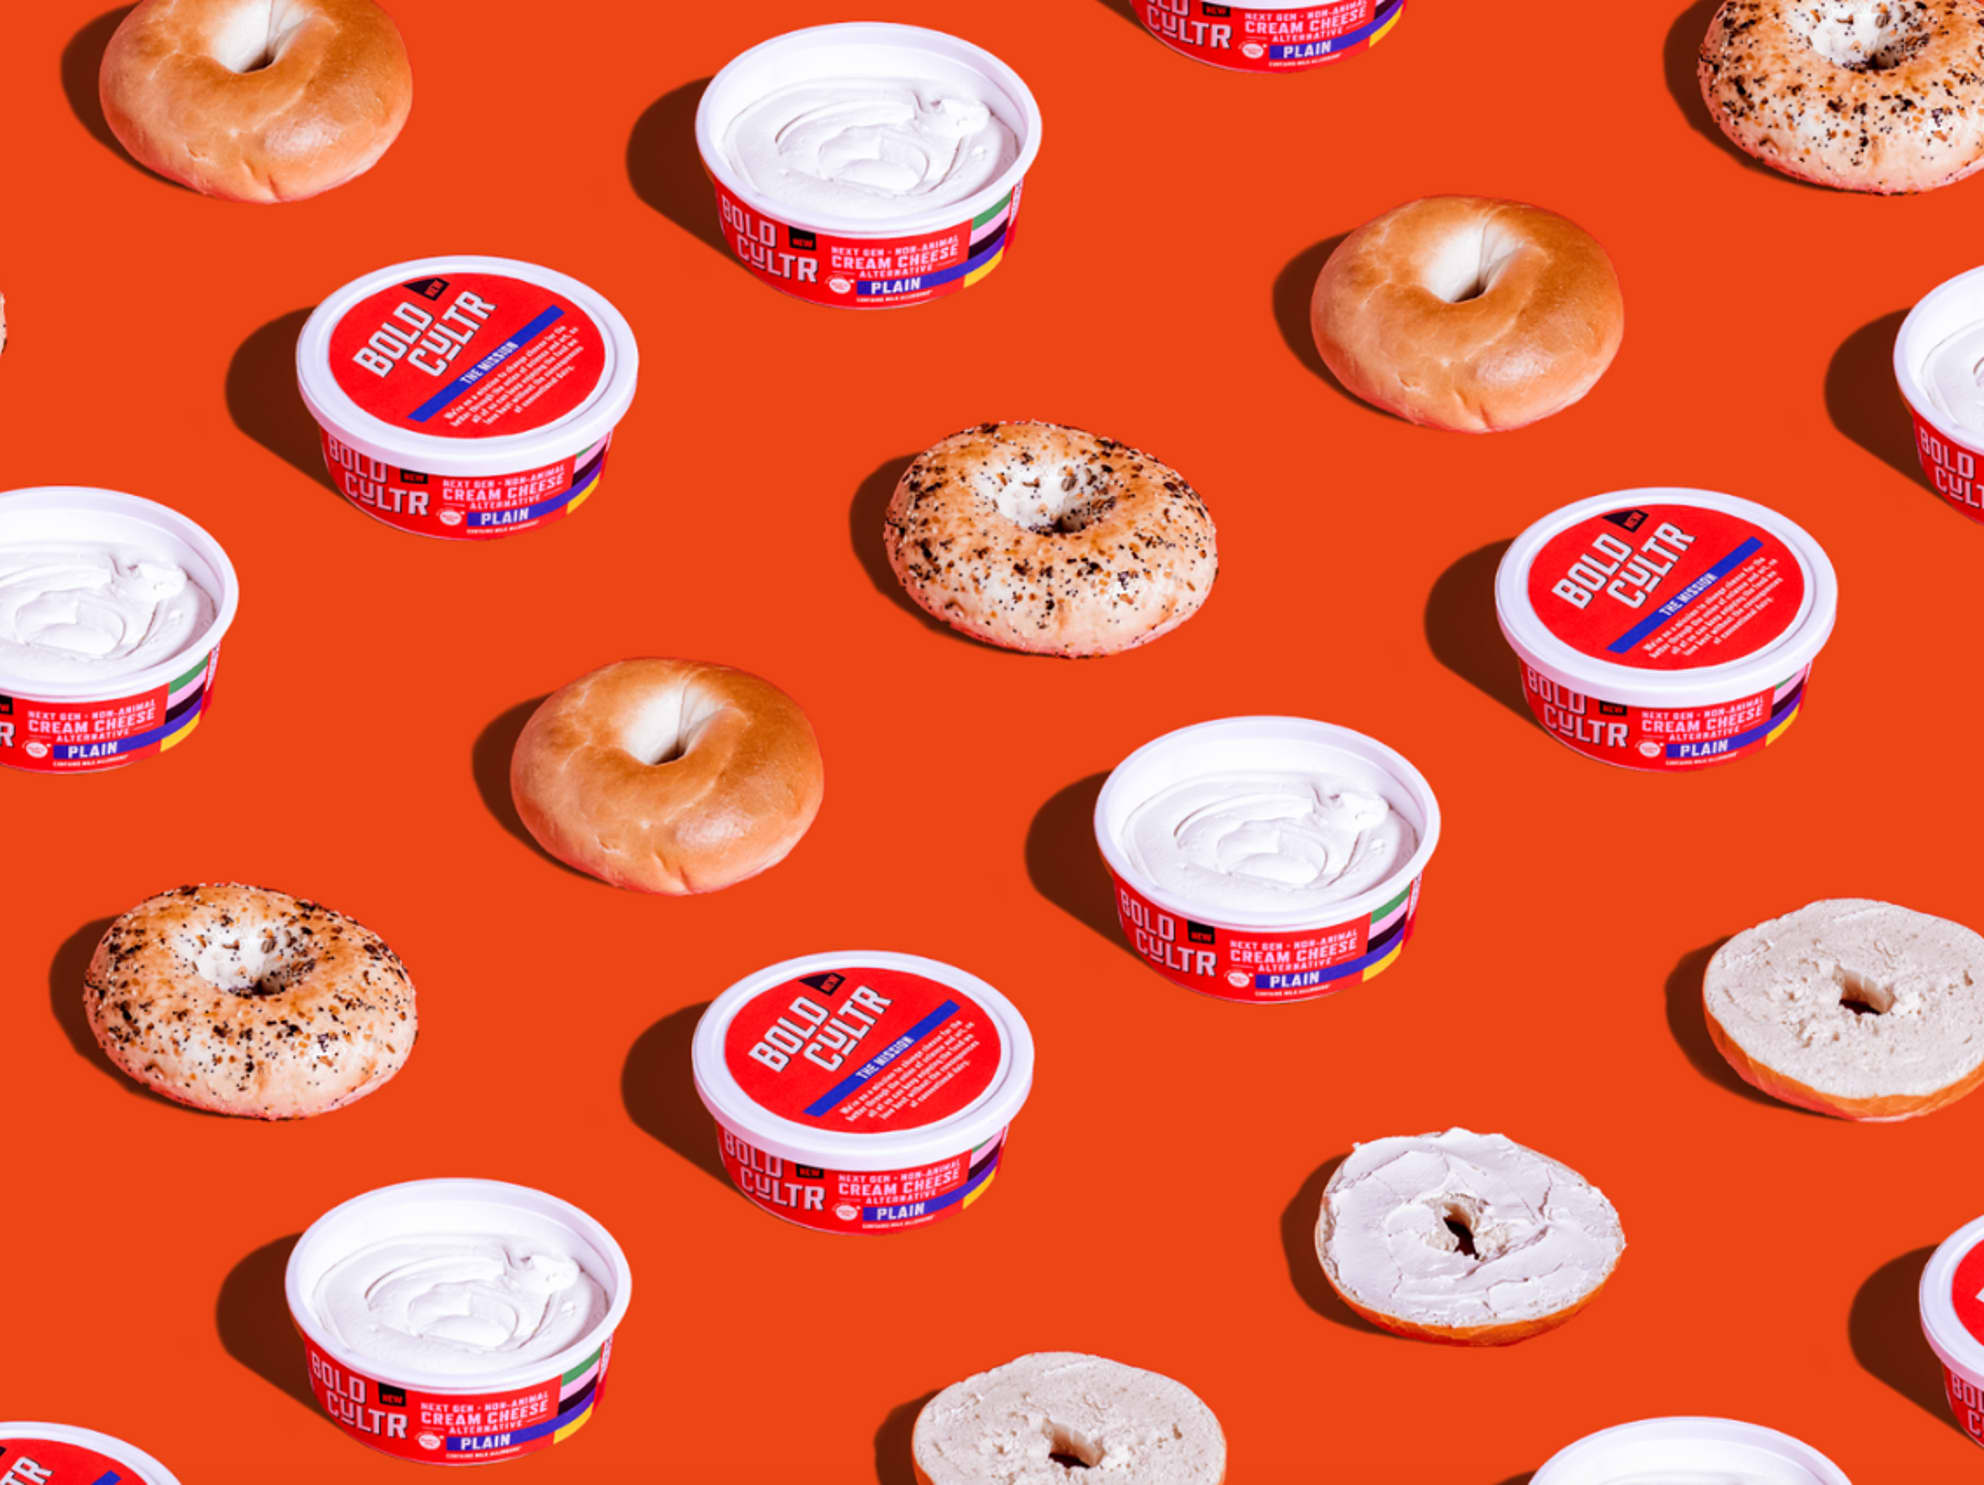 Bold Cultr cream cheese and bagels